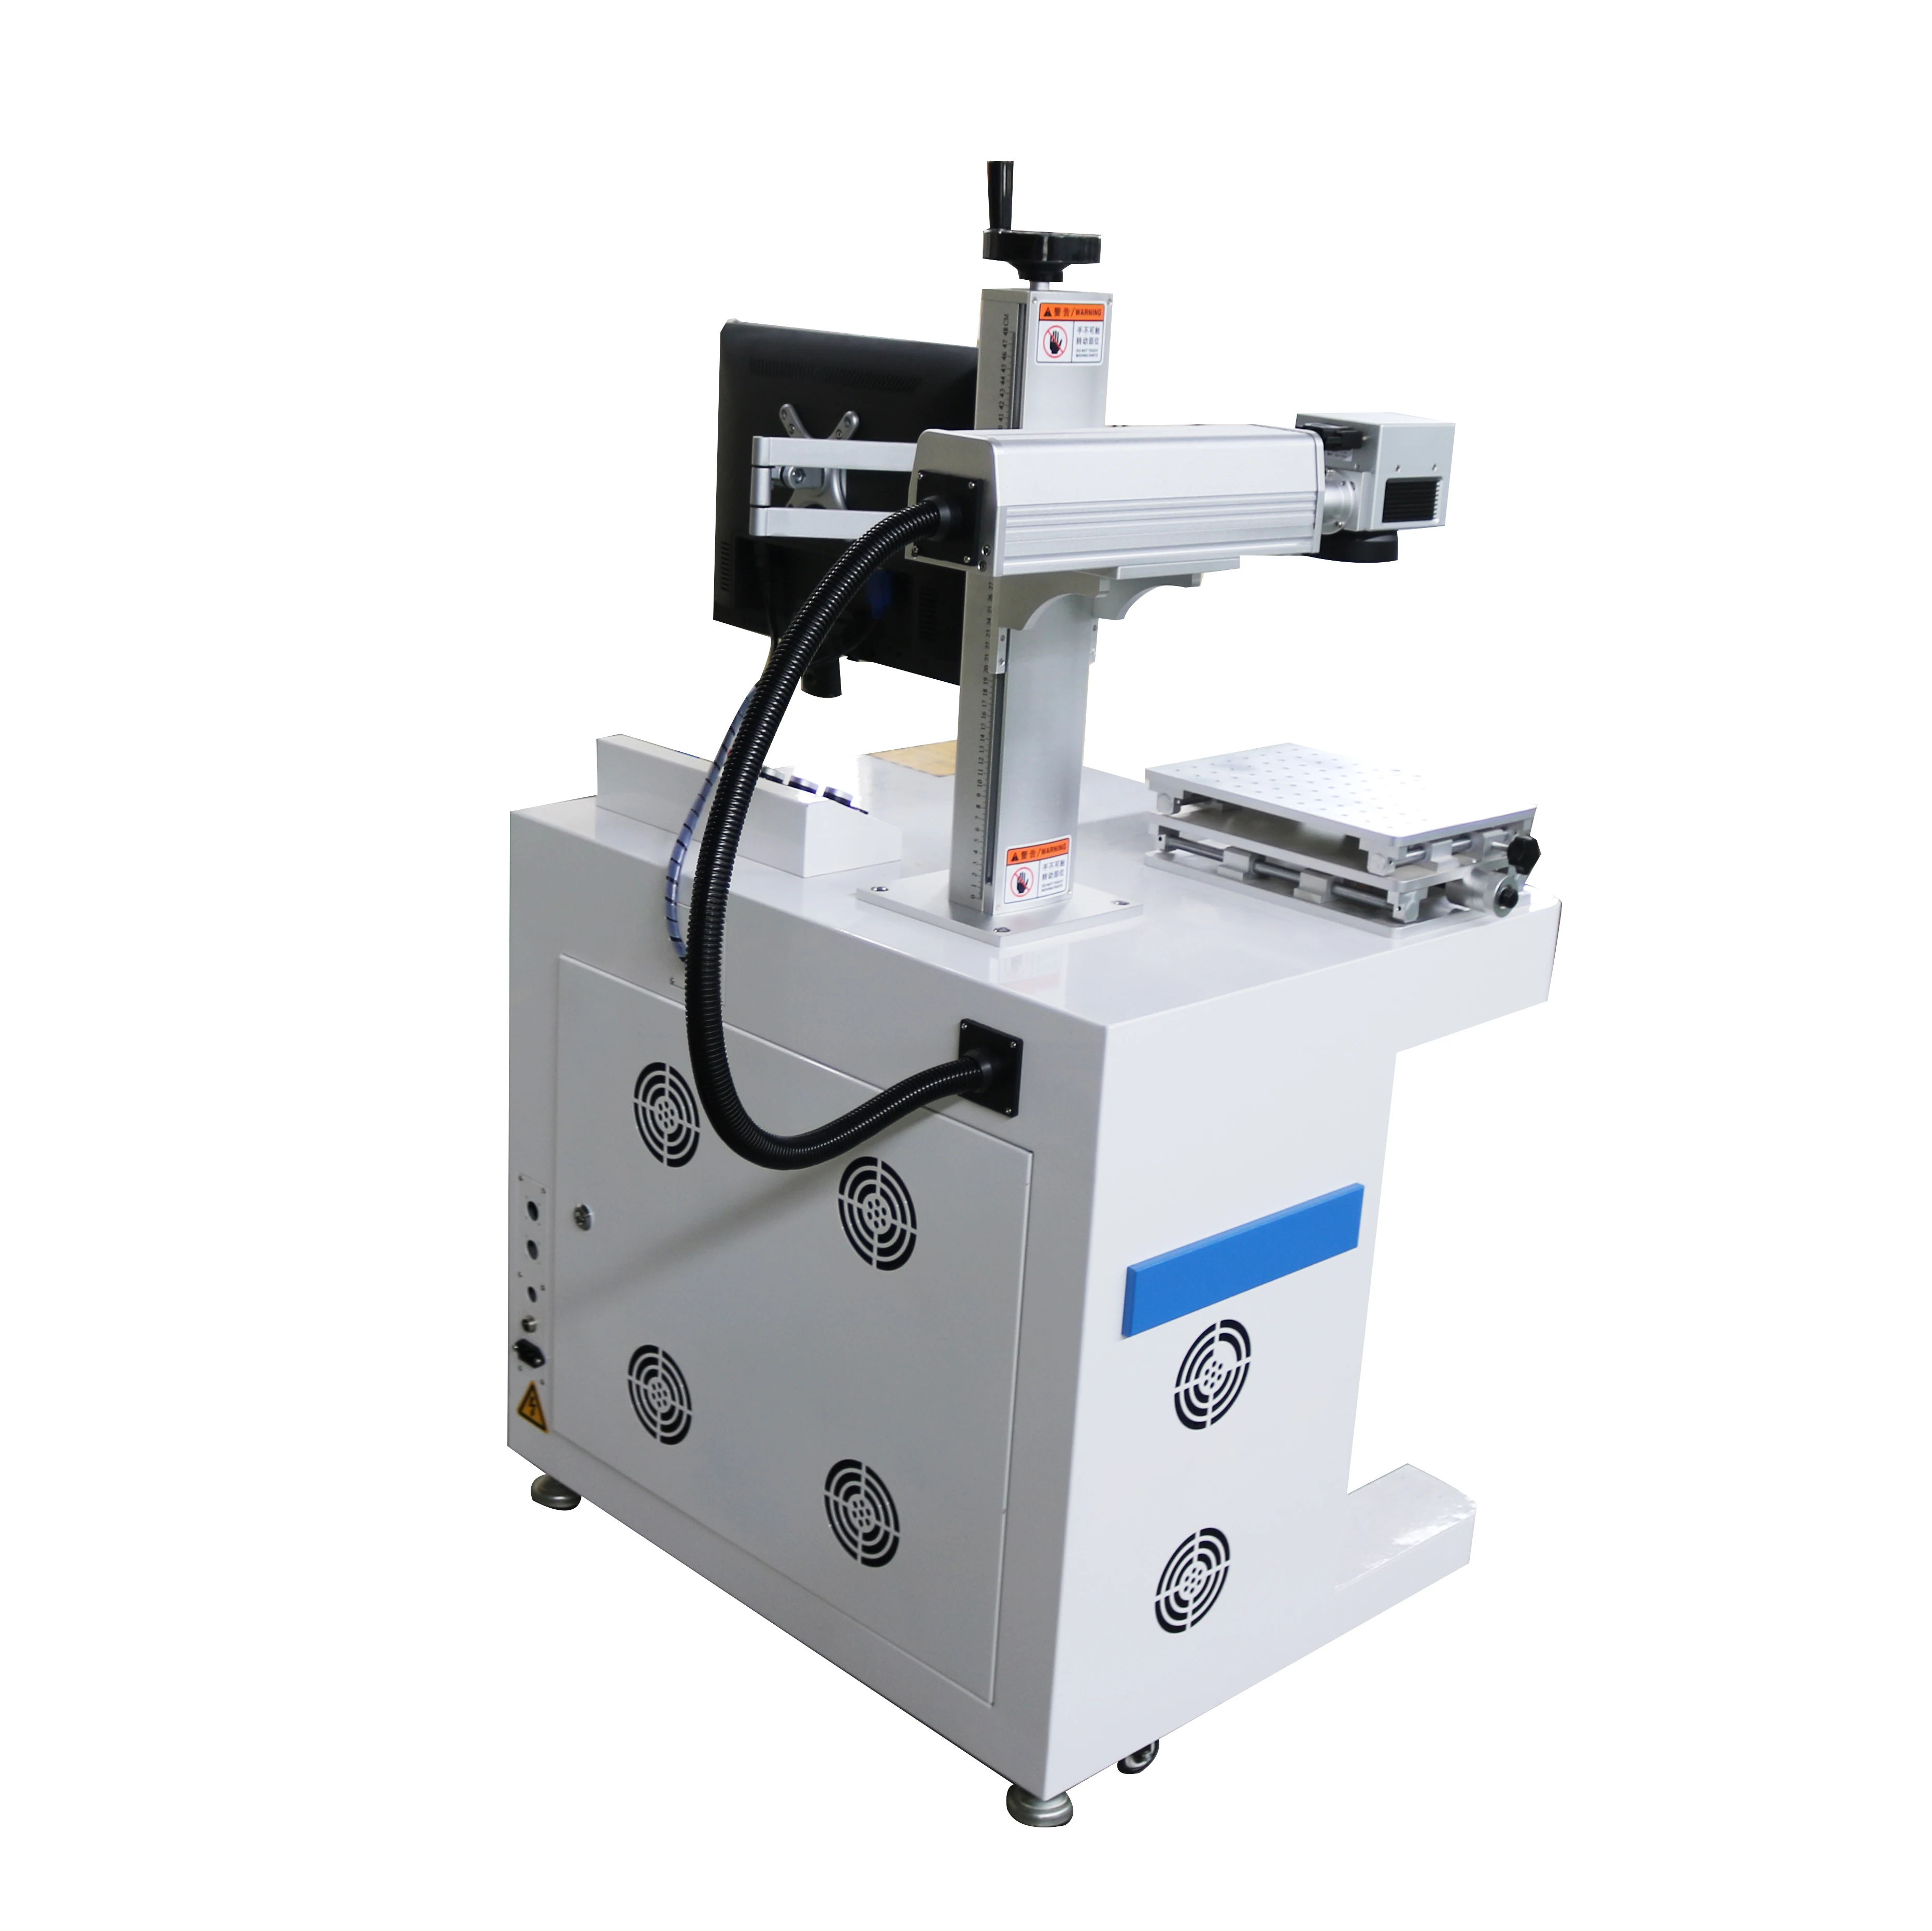 

Raycus 50W 100W Fiber Laser Marking Machine 20W 30W 60W Stainless Steel Engraver Marker with Rotary Axis Metal